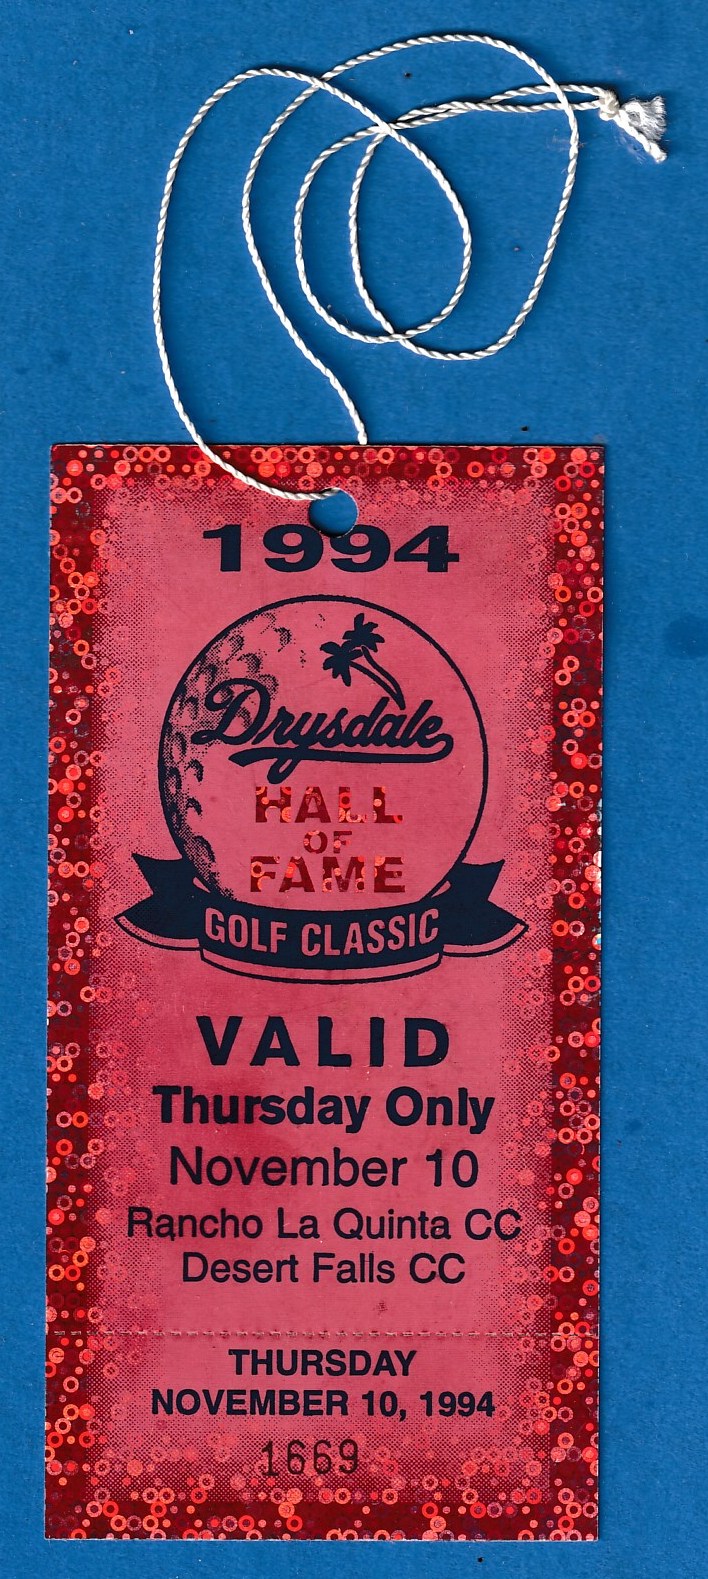  DON DRYSDALE - 1994 Drysdale Hall-of-Fame Golf Classic TICKET Baseball cards value